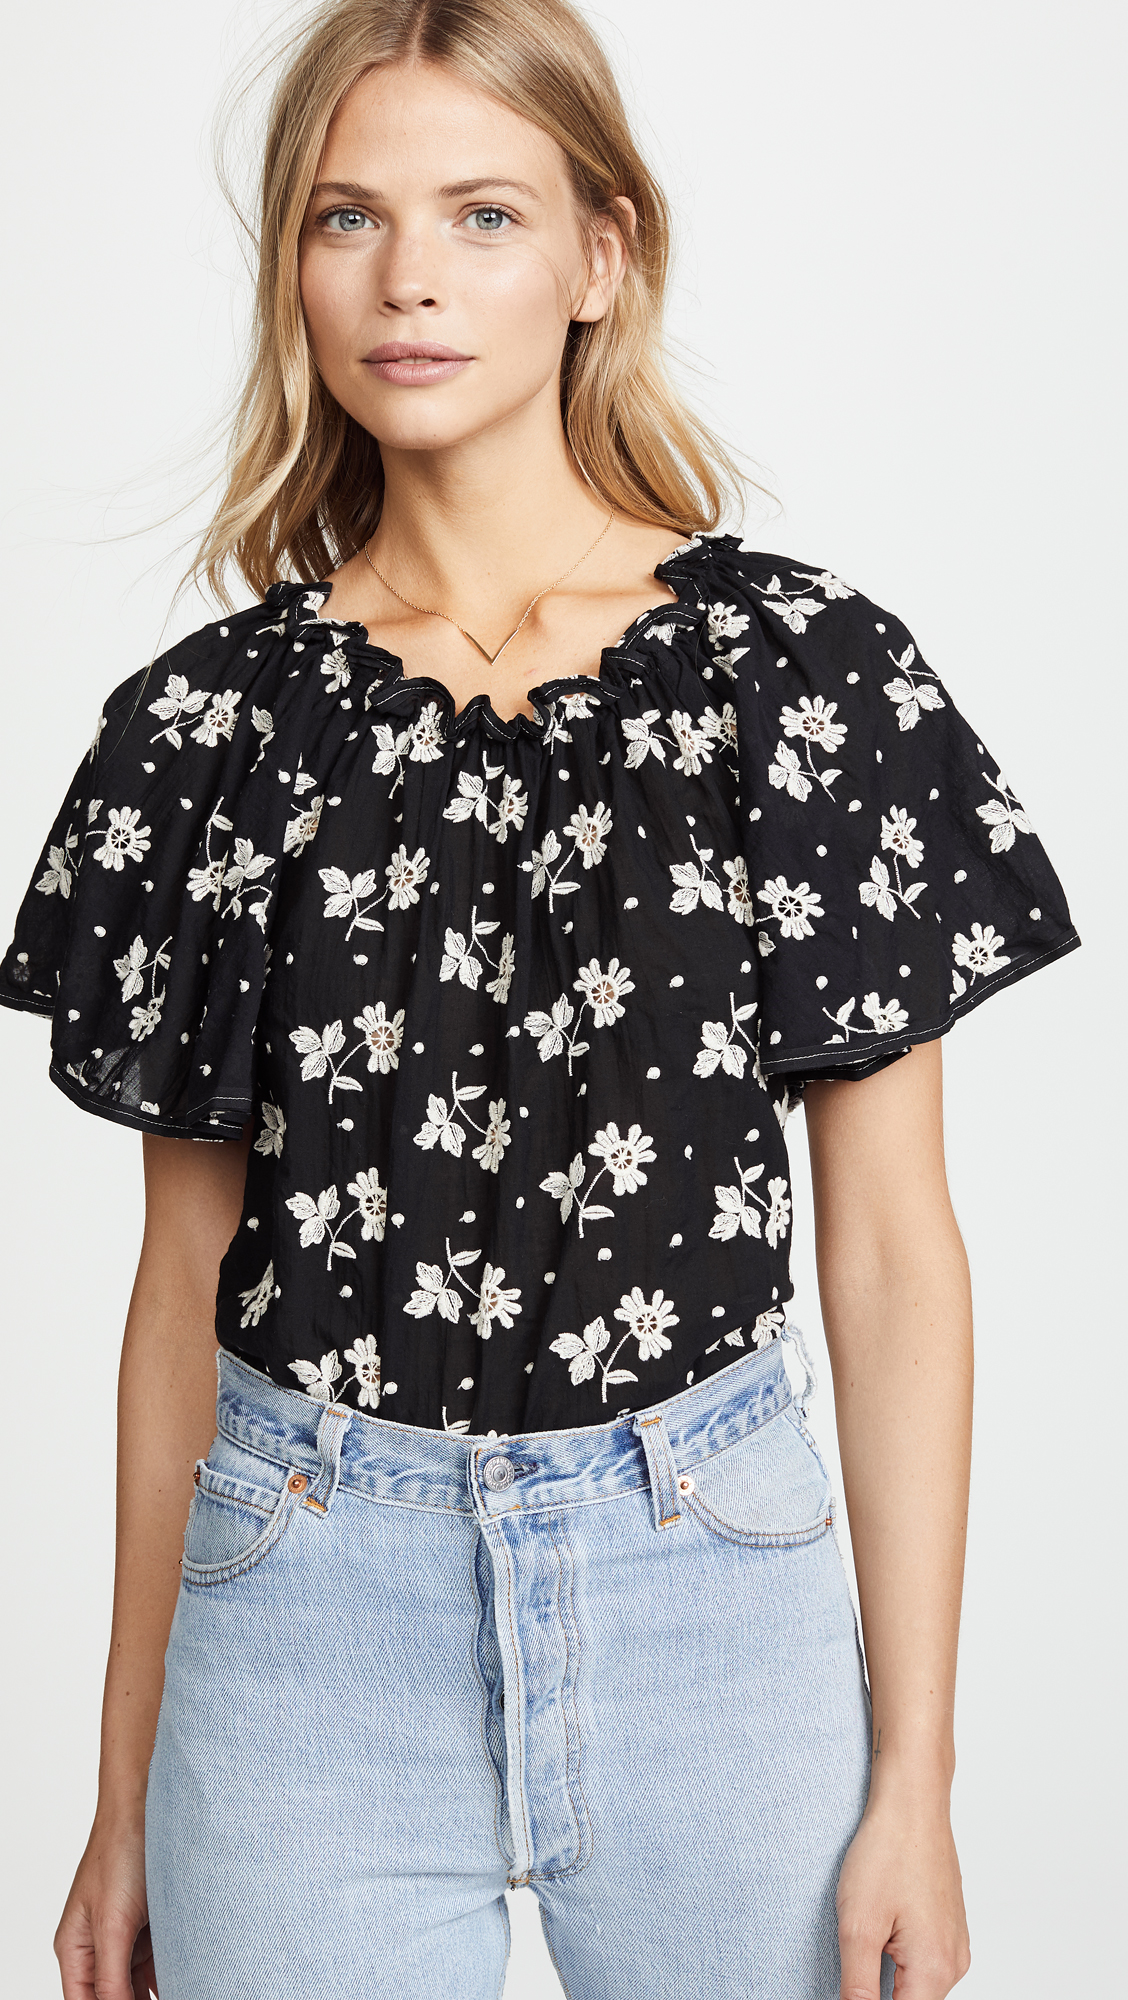 Black Ruffle Top with Embroidered White Flowers